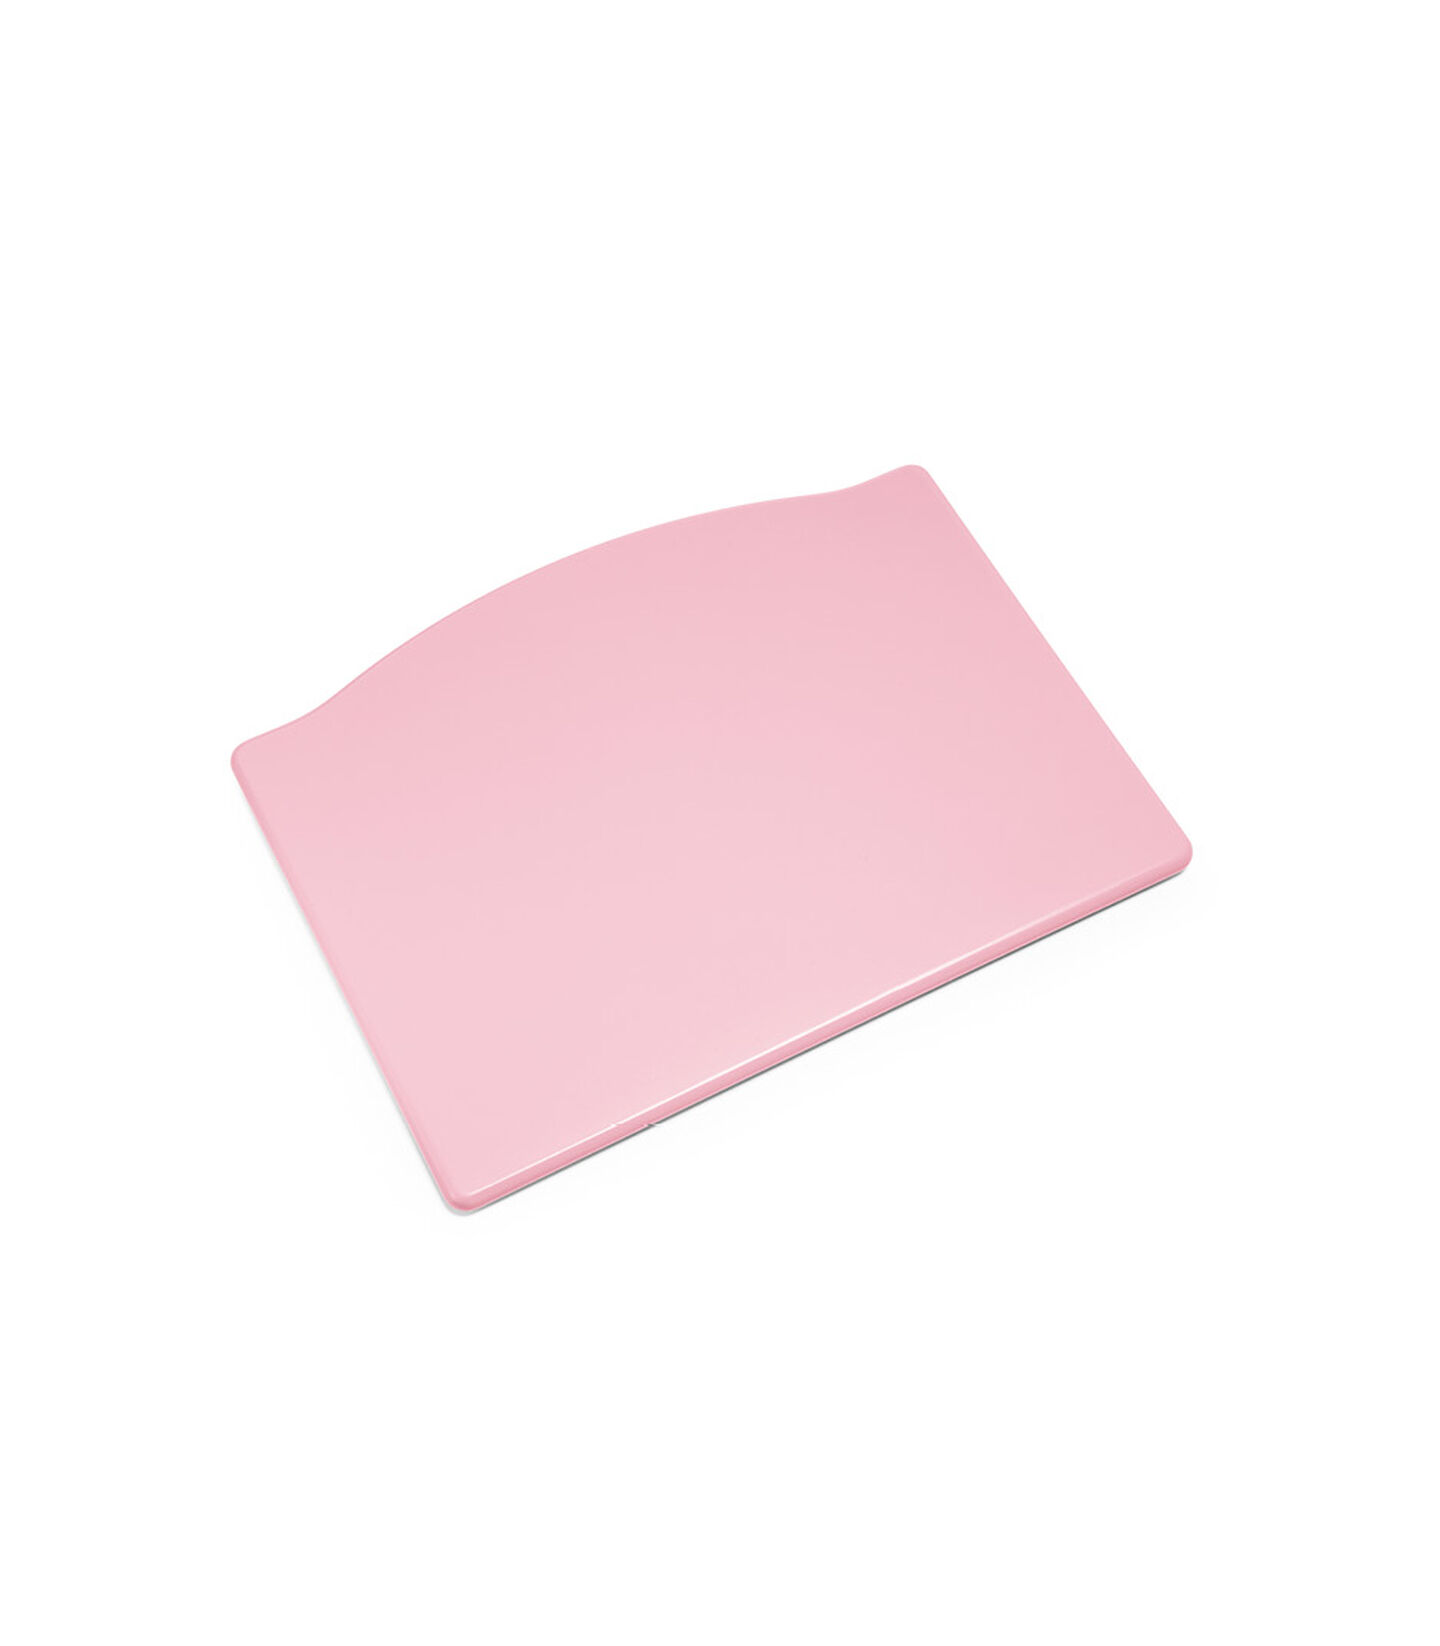 Tripp Trapp® Footplate Soft Pink, Soft Pink, mainview view 1